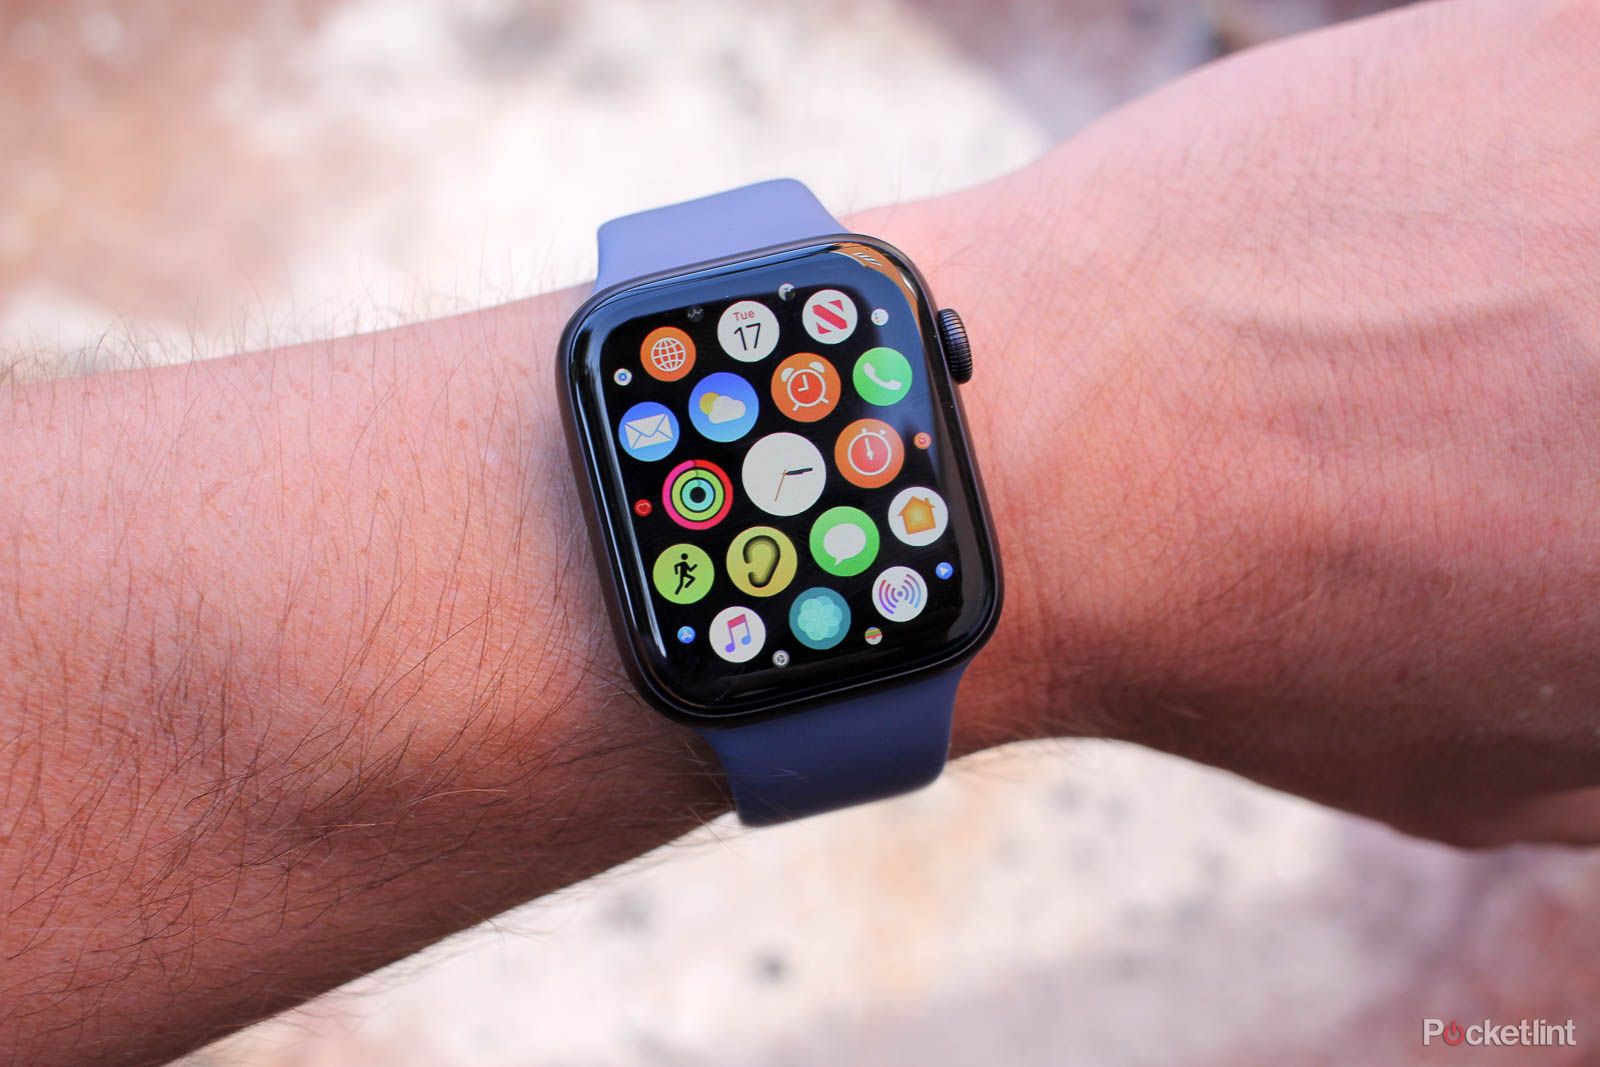 Micro LED displays could be coming to the Apple Watch, but not for 3-4 years photo 1